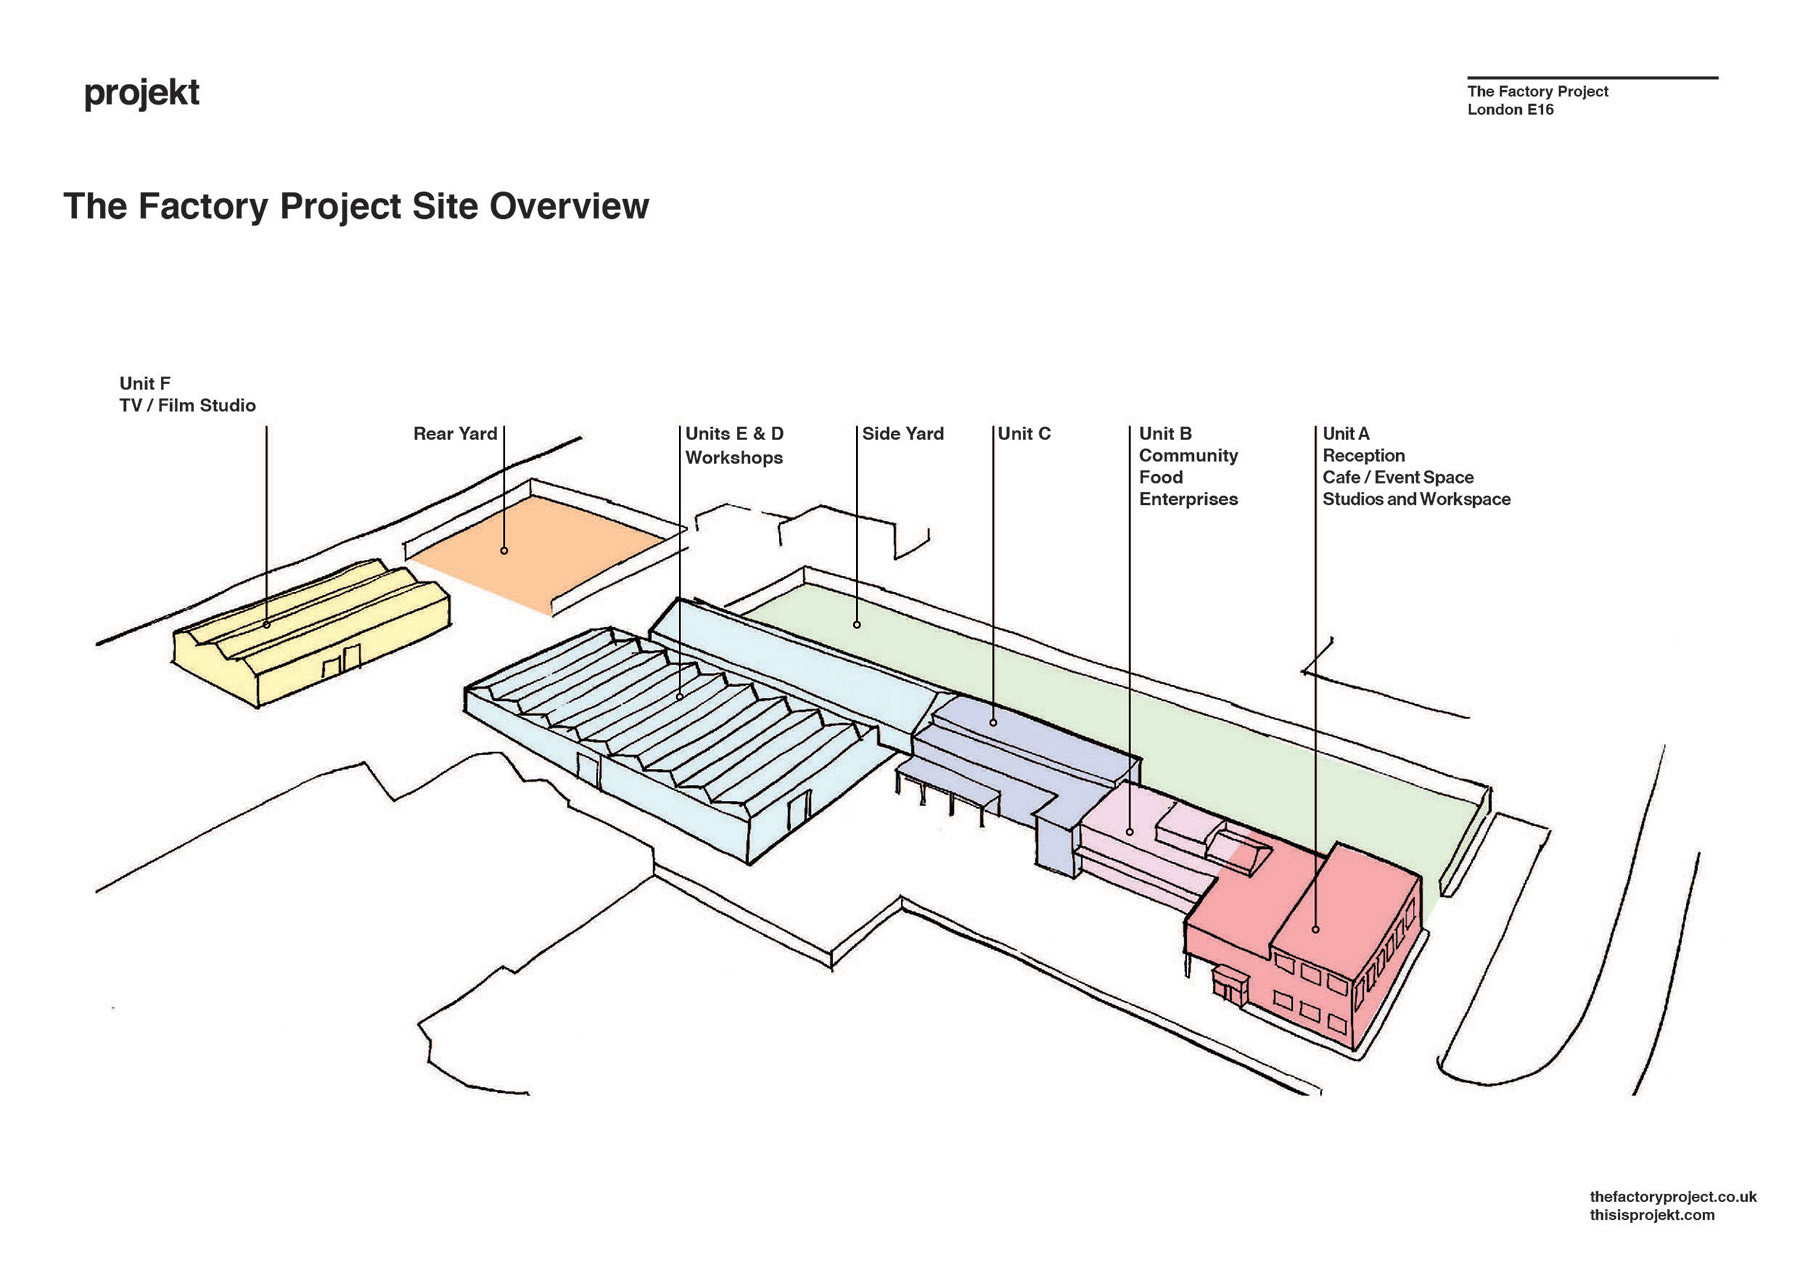 The Factory Project site overview map